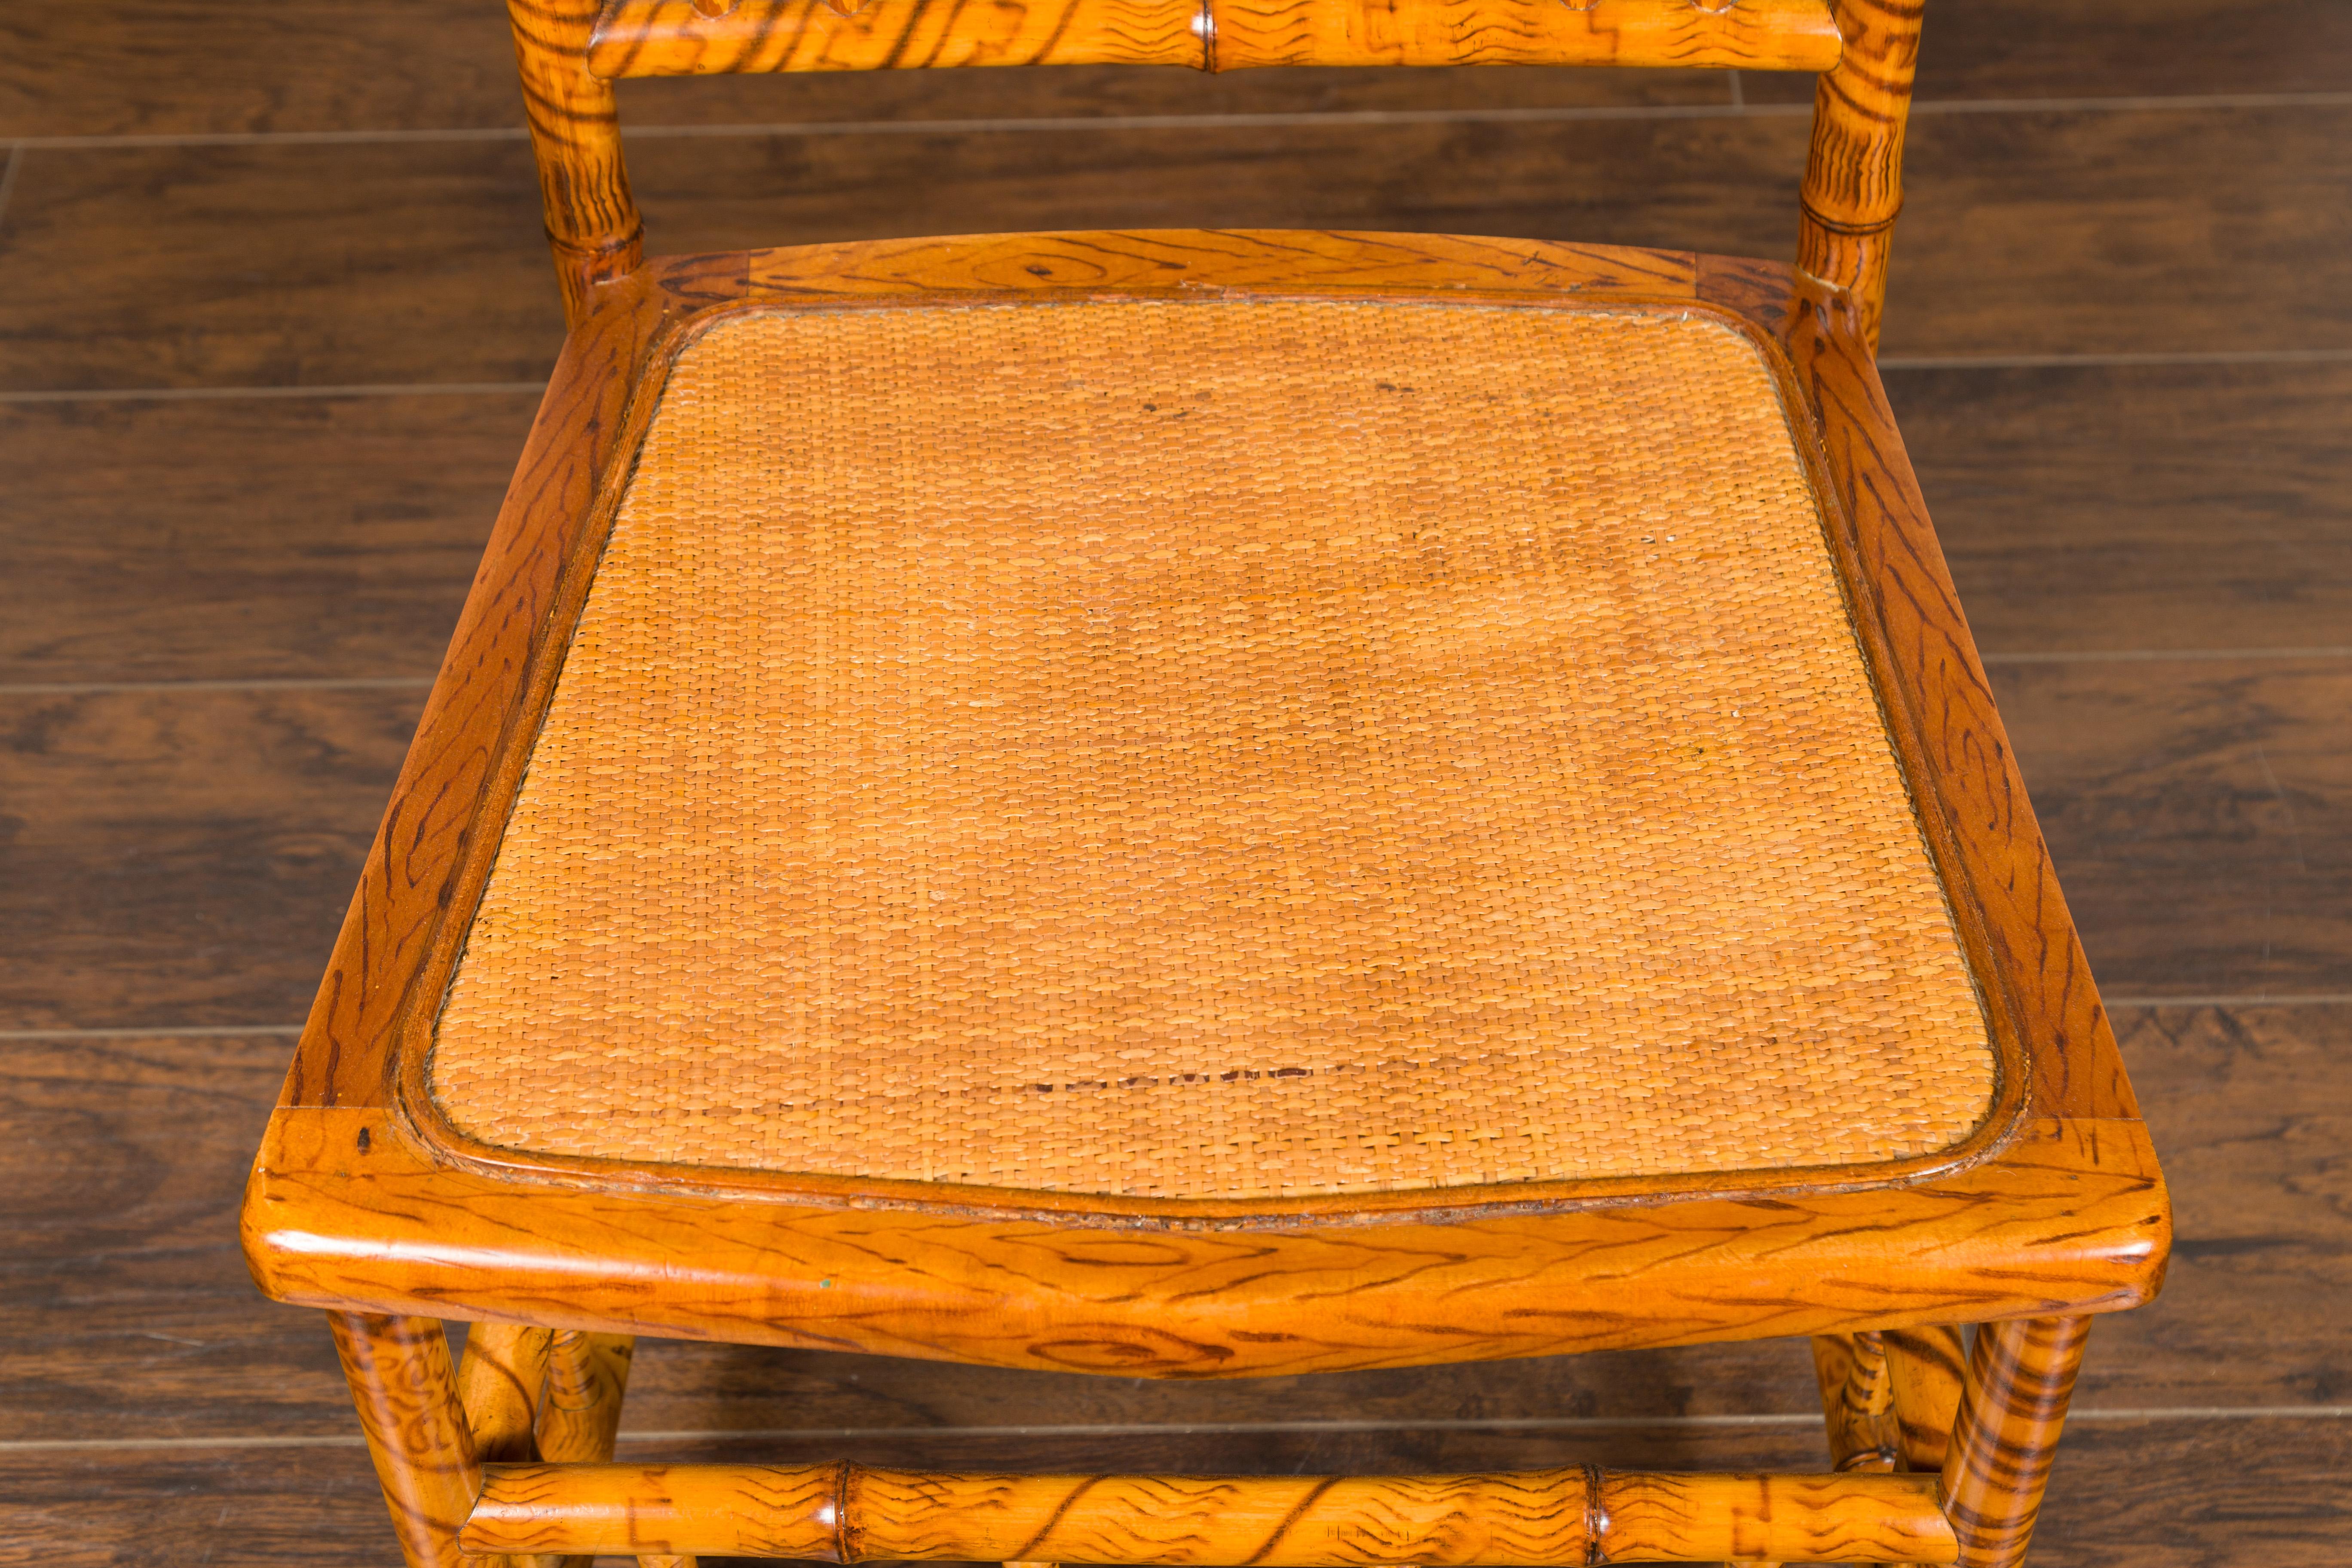 English 1890s Bamboo Slipper Chair with Fan Back, Rattan Seat and Casters For Sale 3